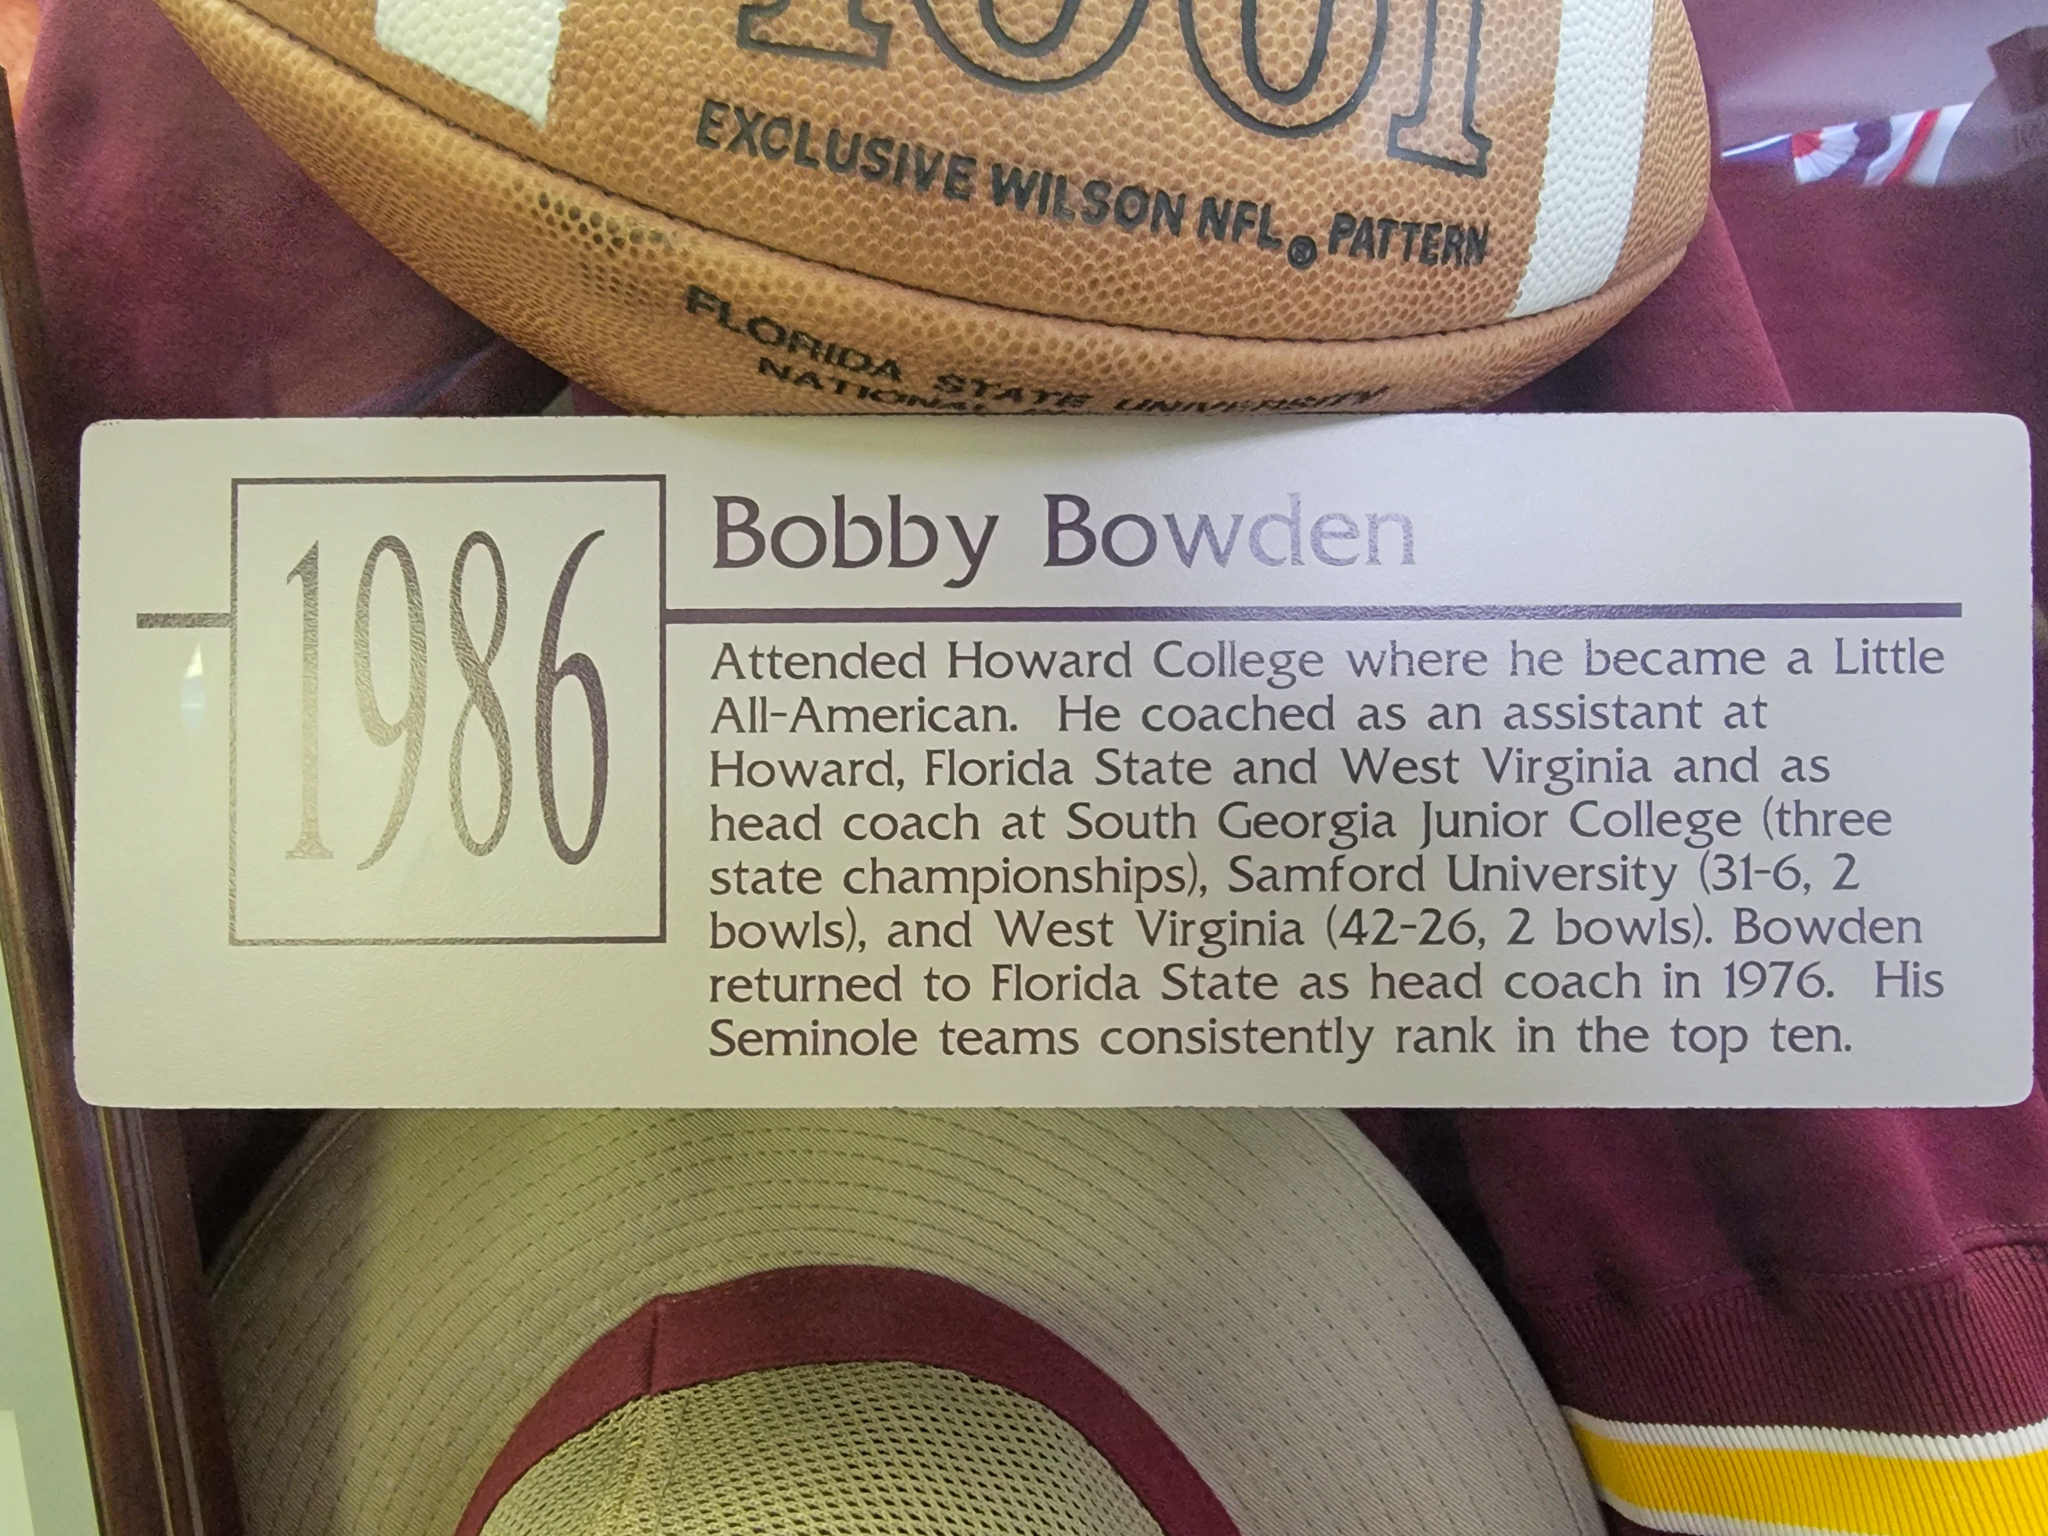 Bio of Bobby Bowden displayed in Alabama Sports Hall of Fame